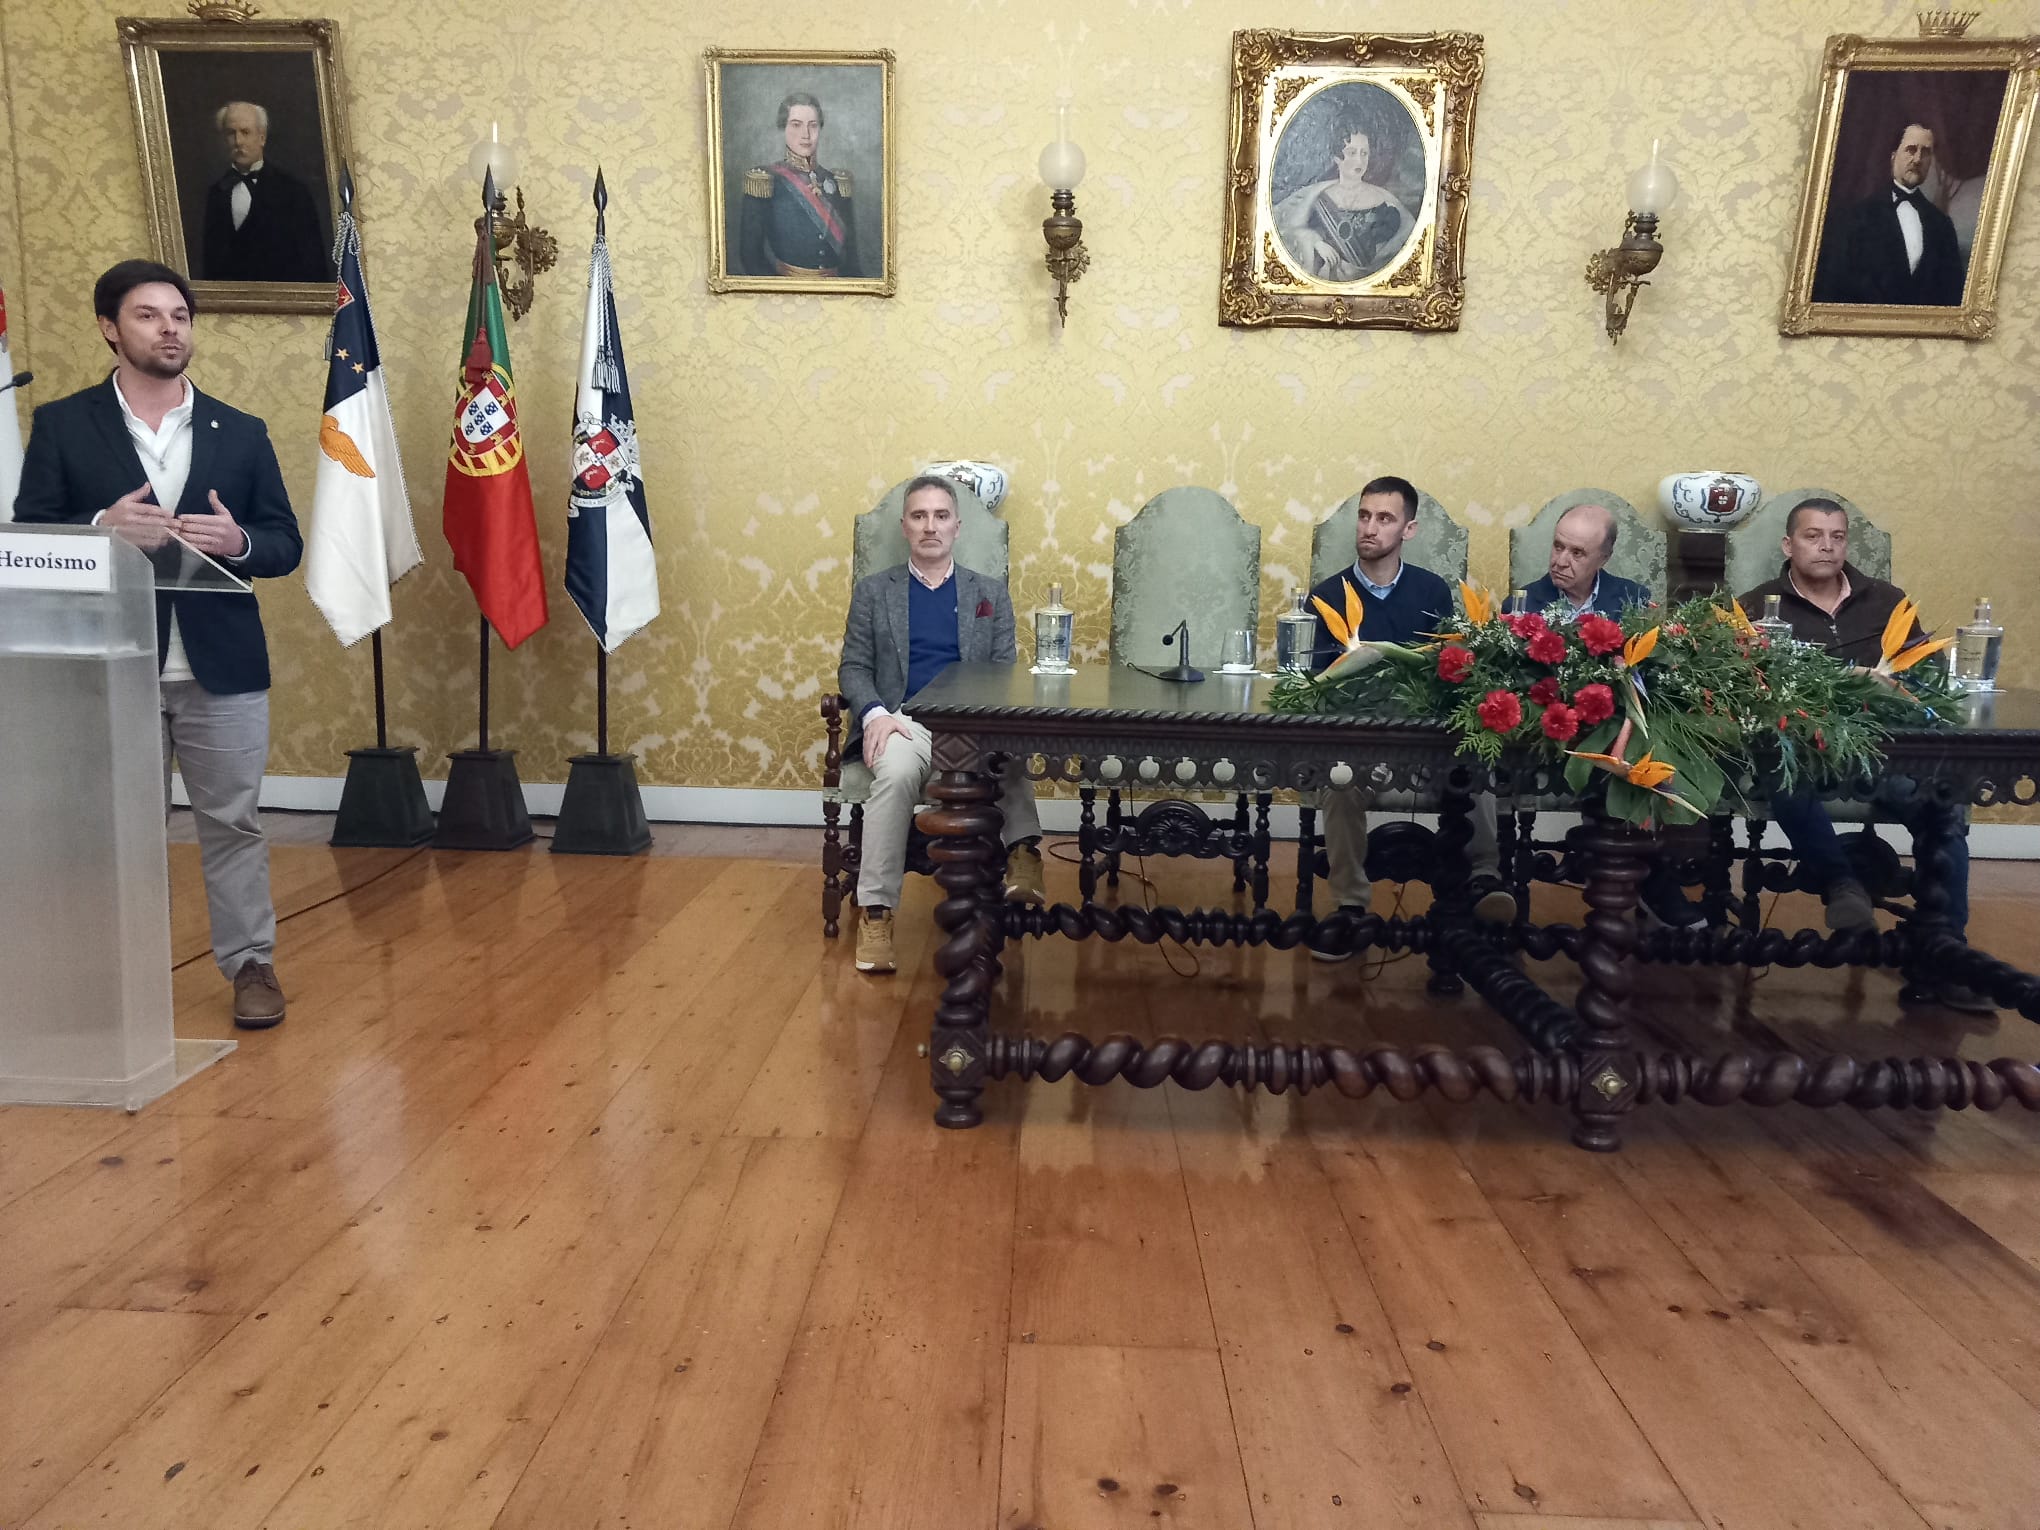 Press conference was held in Terceira Island to present the championships